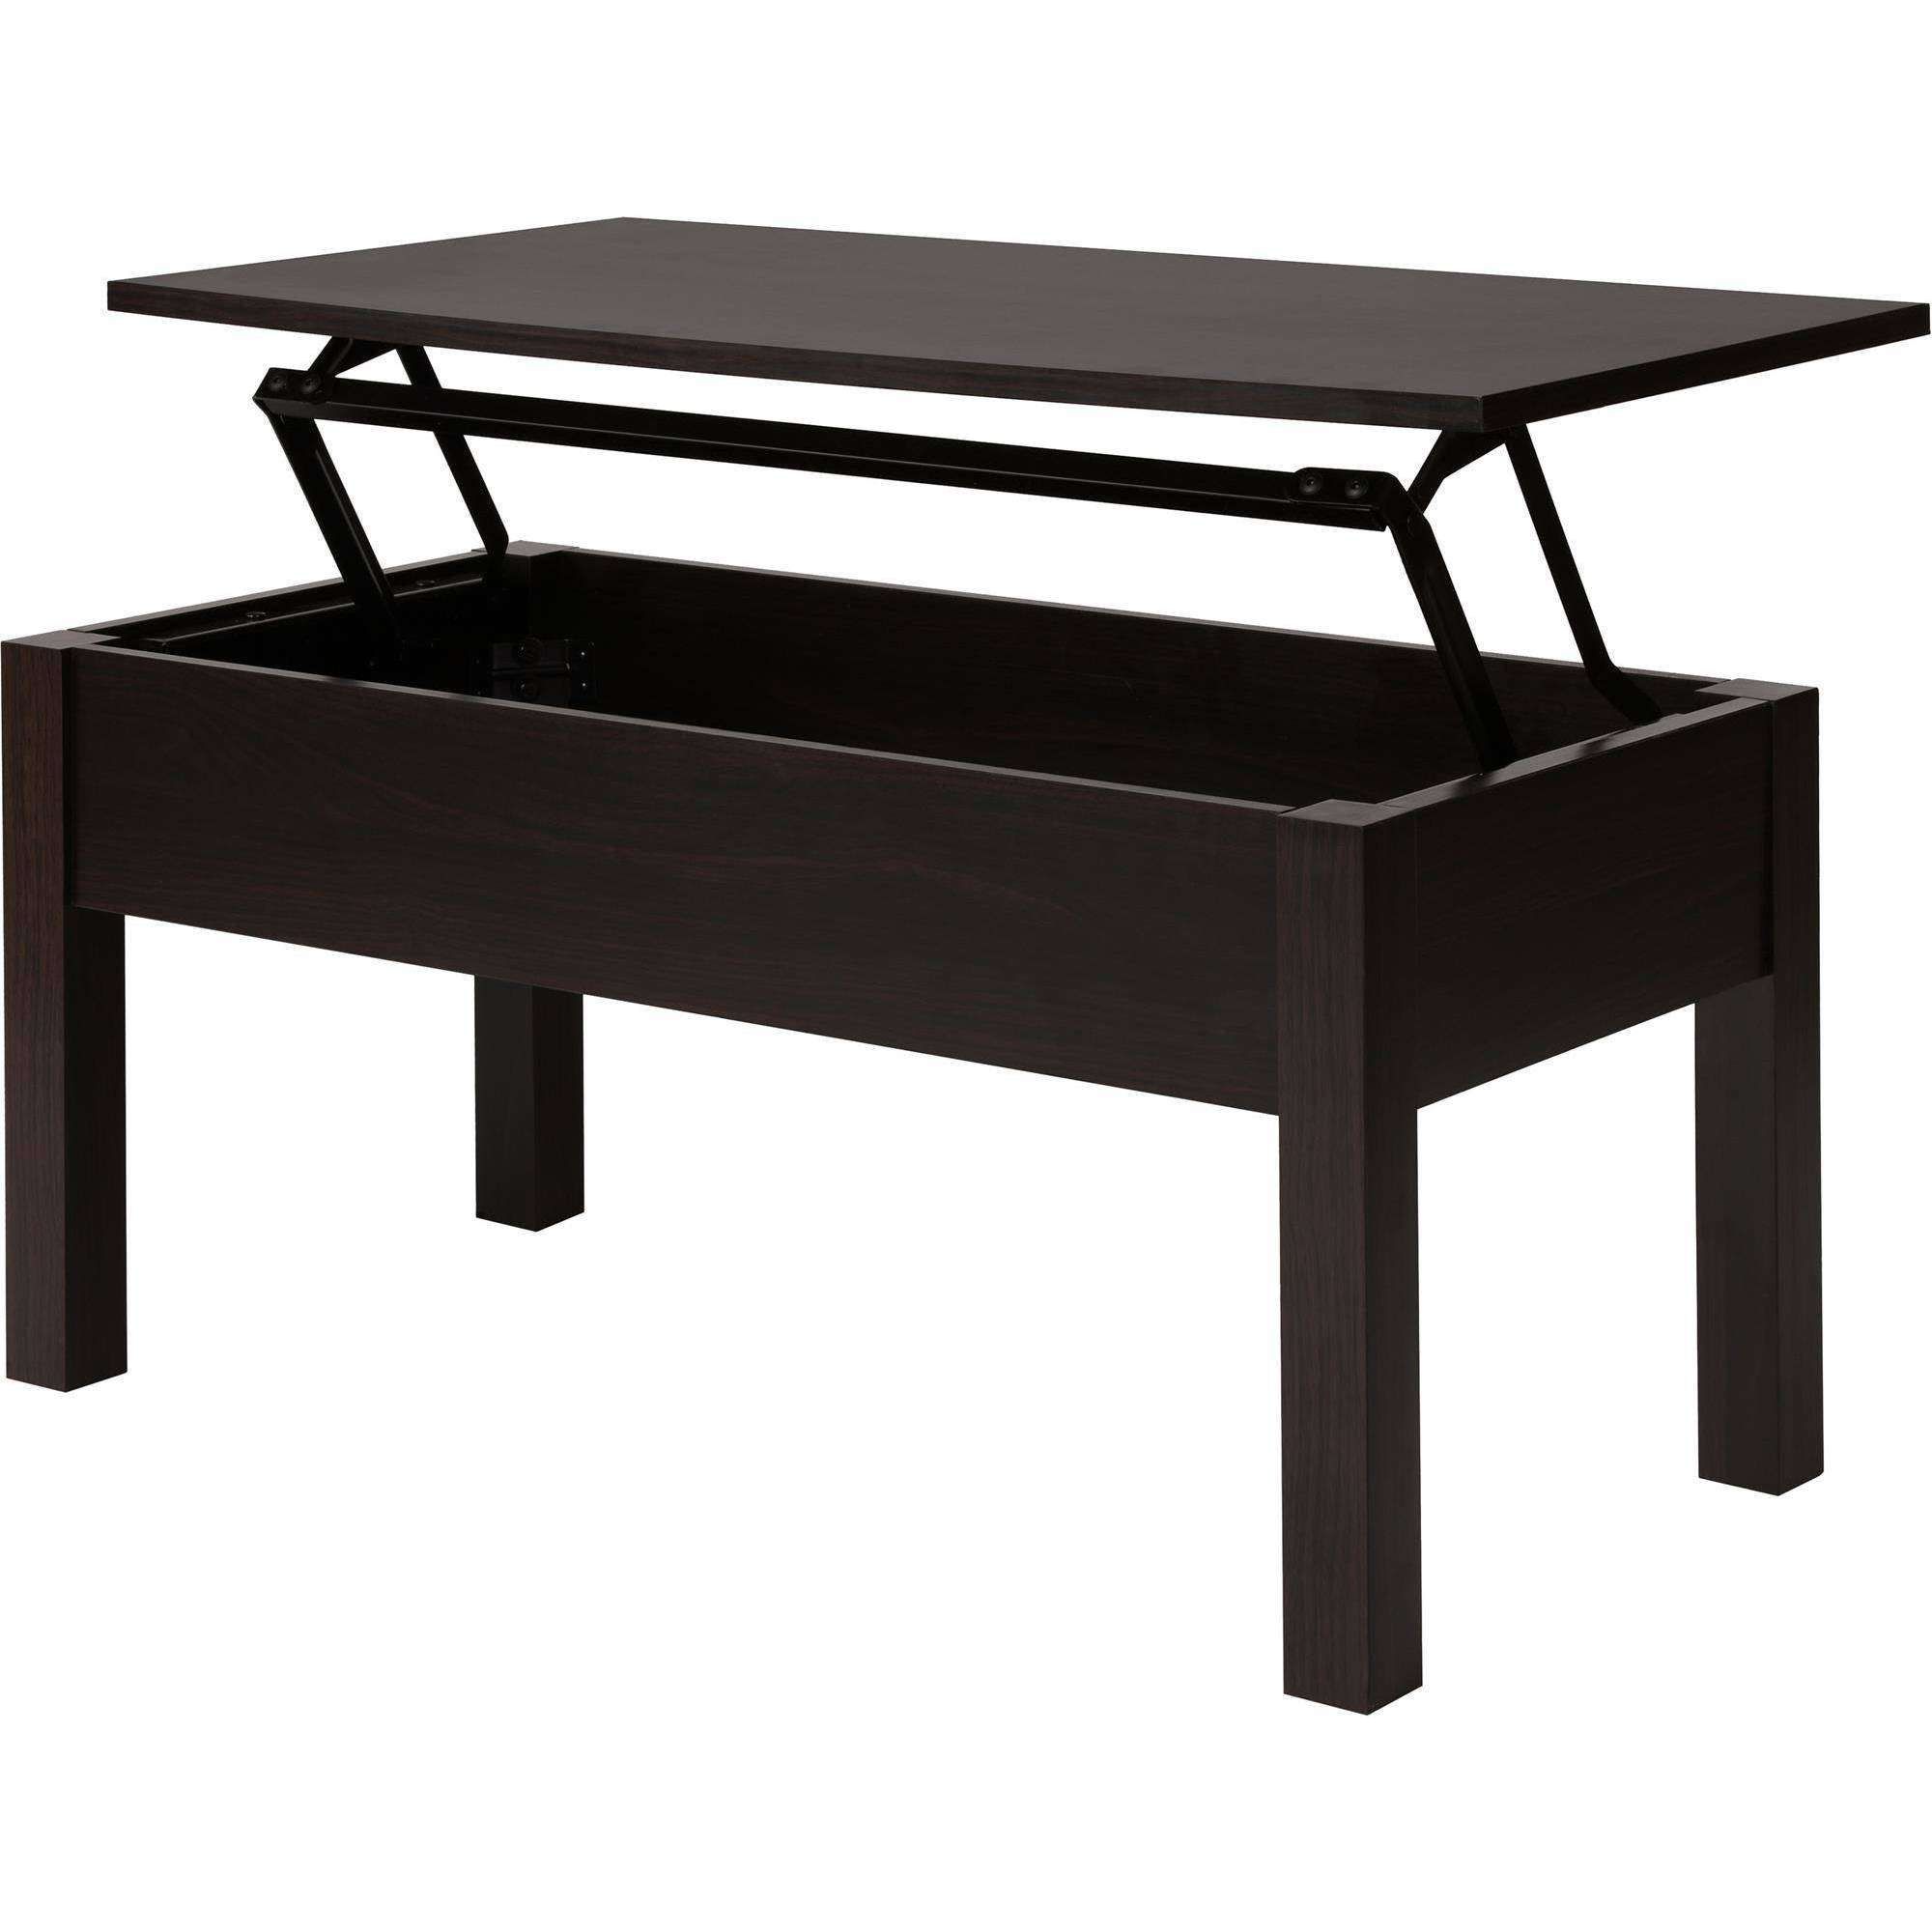 Fashionable Rising Coffee Tables Regarding Coffee Tables : Exquisite Lift Top Coffee Table Hinges White Up (View 14 of 20)